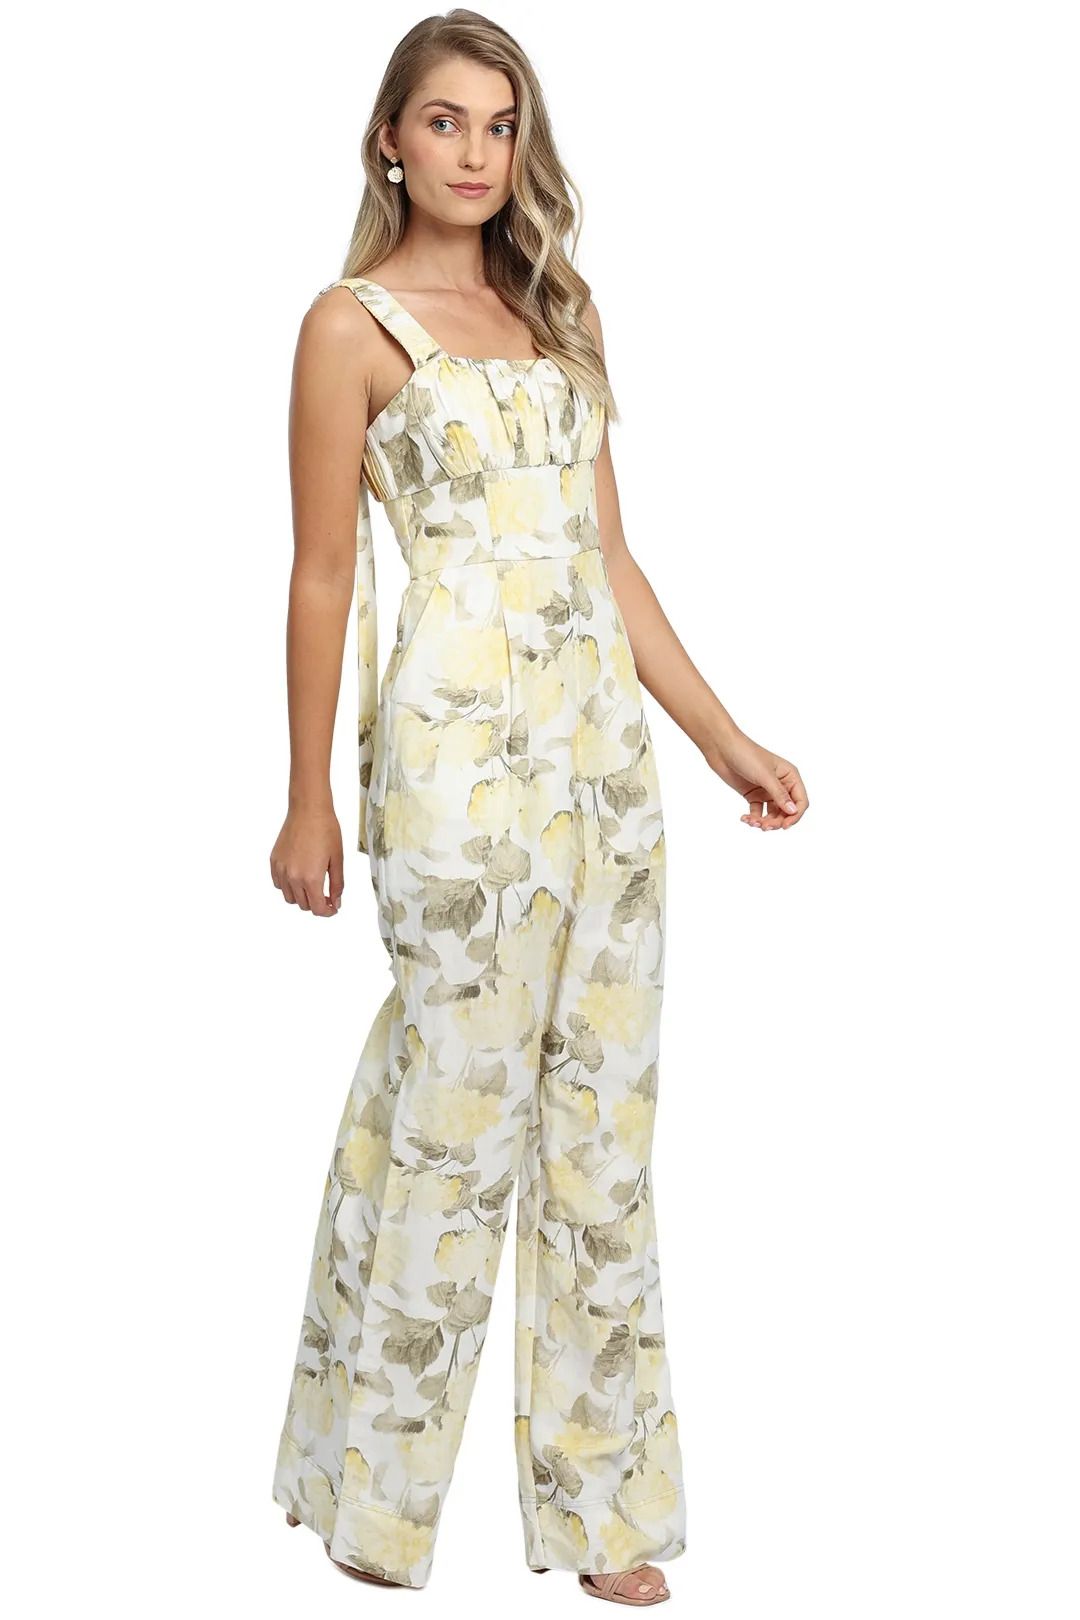 Rent Exeter jumpsuit for formal events.